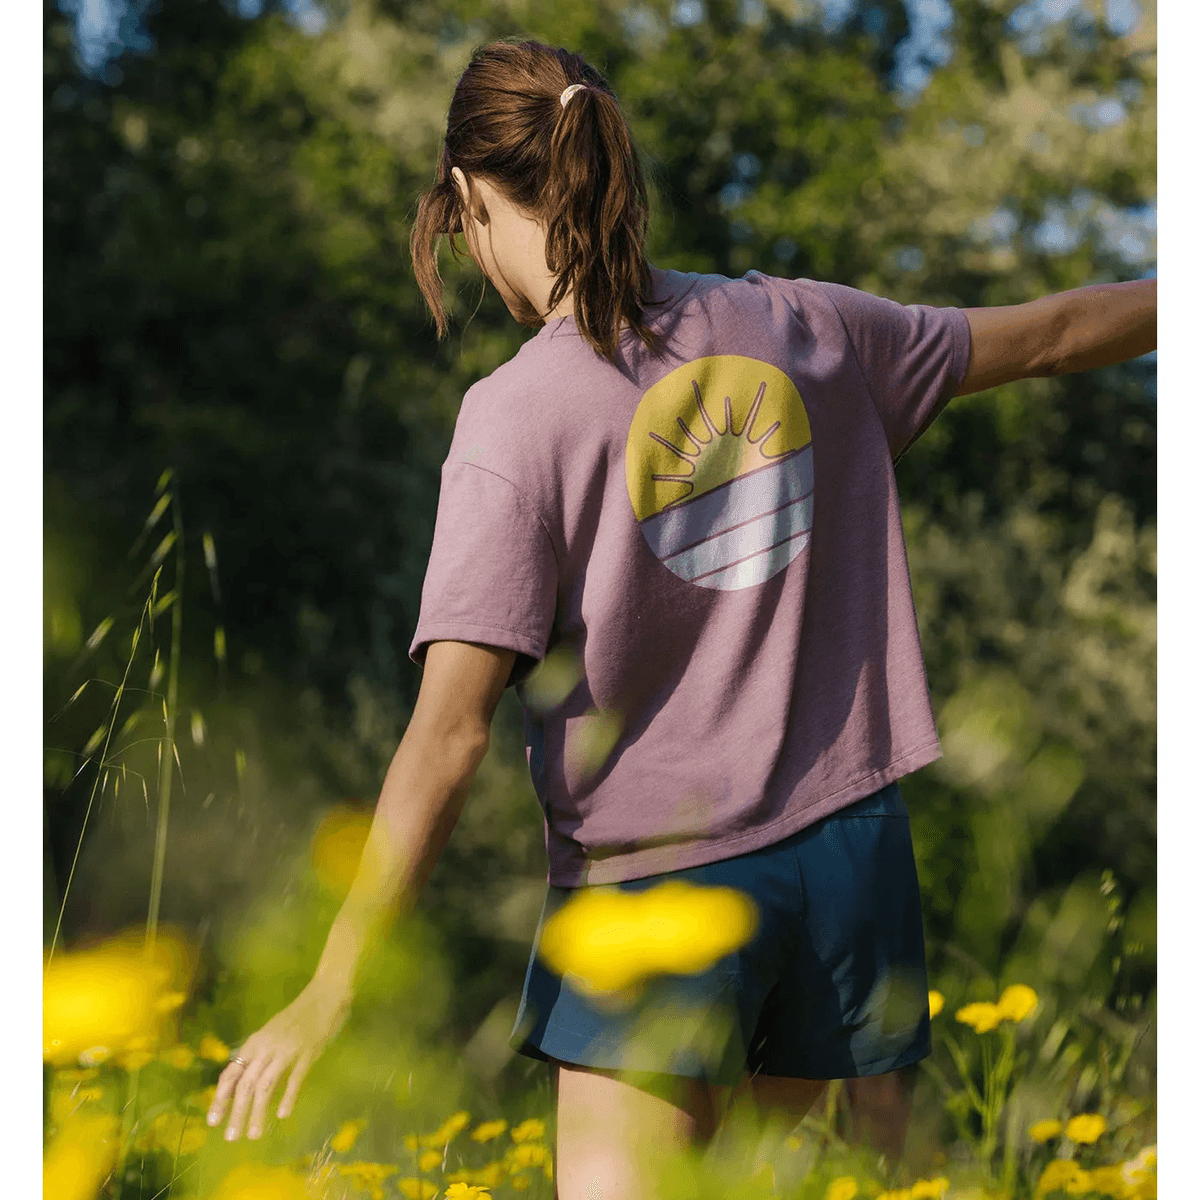 Free Fly - Free Fly Women’s Daybreak Tee - The Shoe Collective